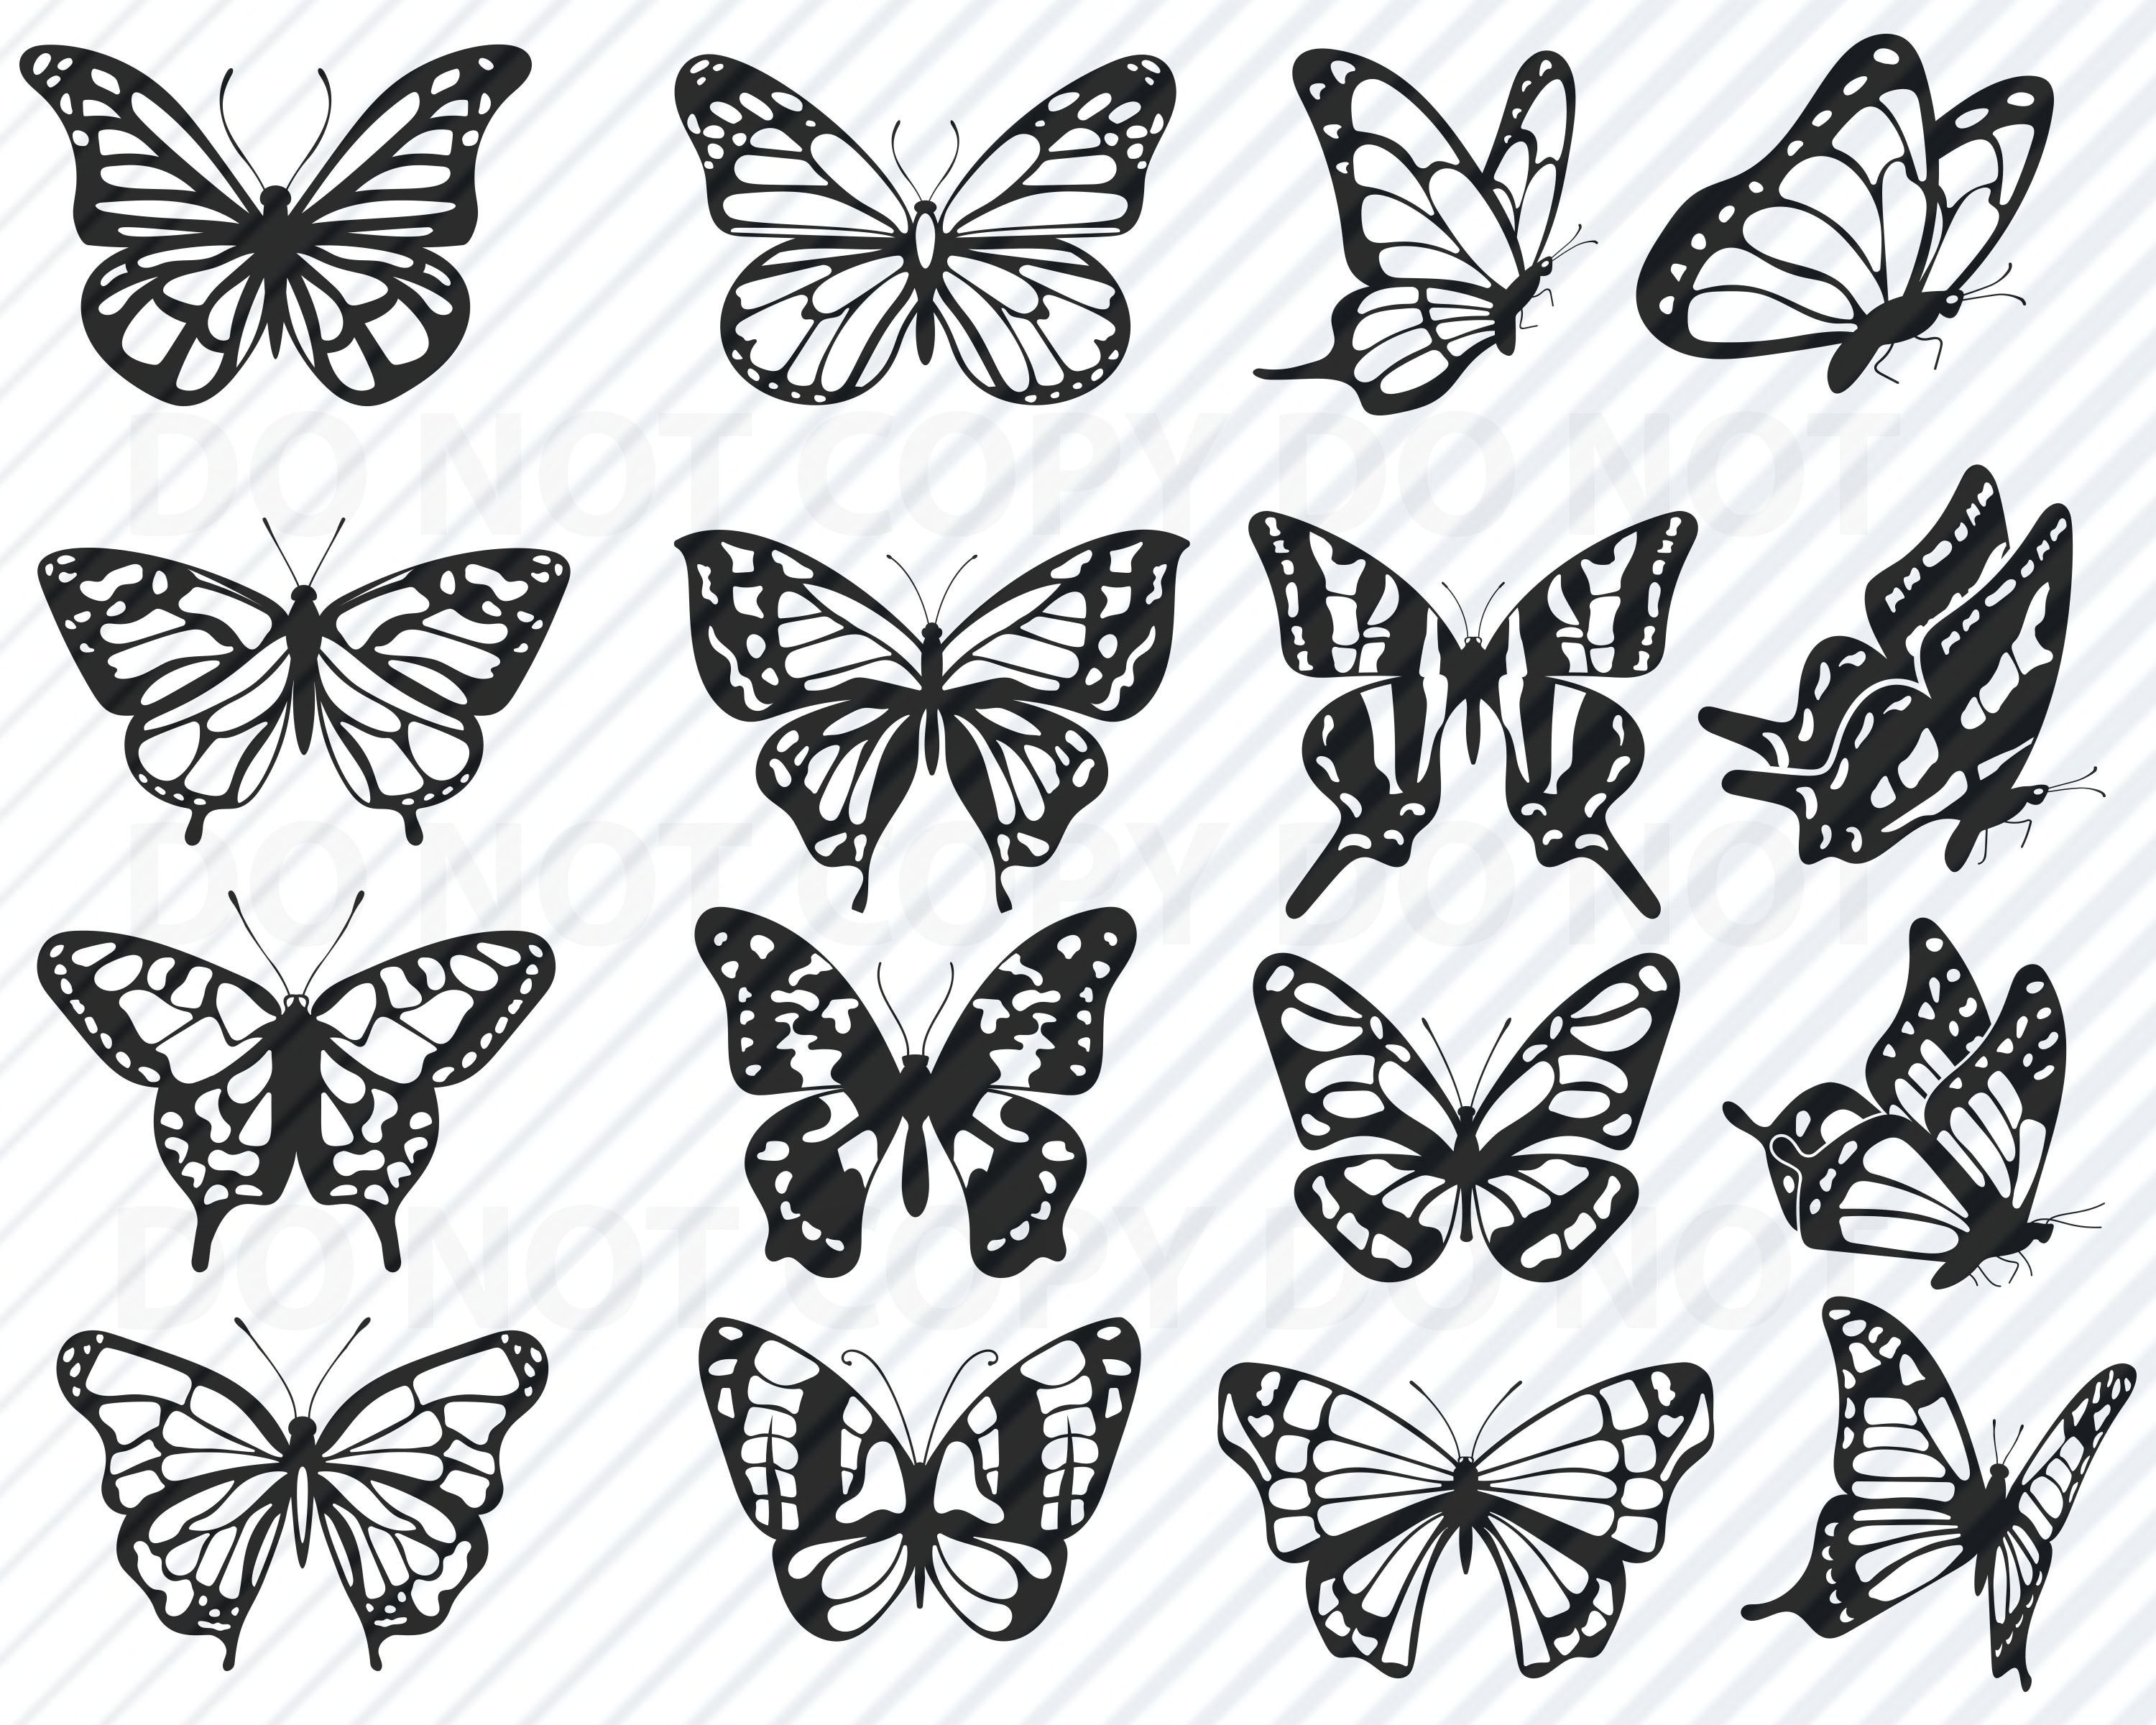 Download Free SVG 1,225 Monarch butterfly vector images at Vectorified.com ...